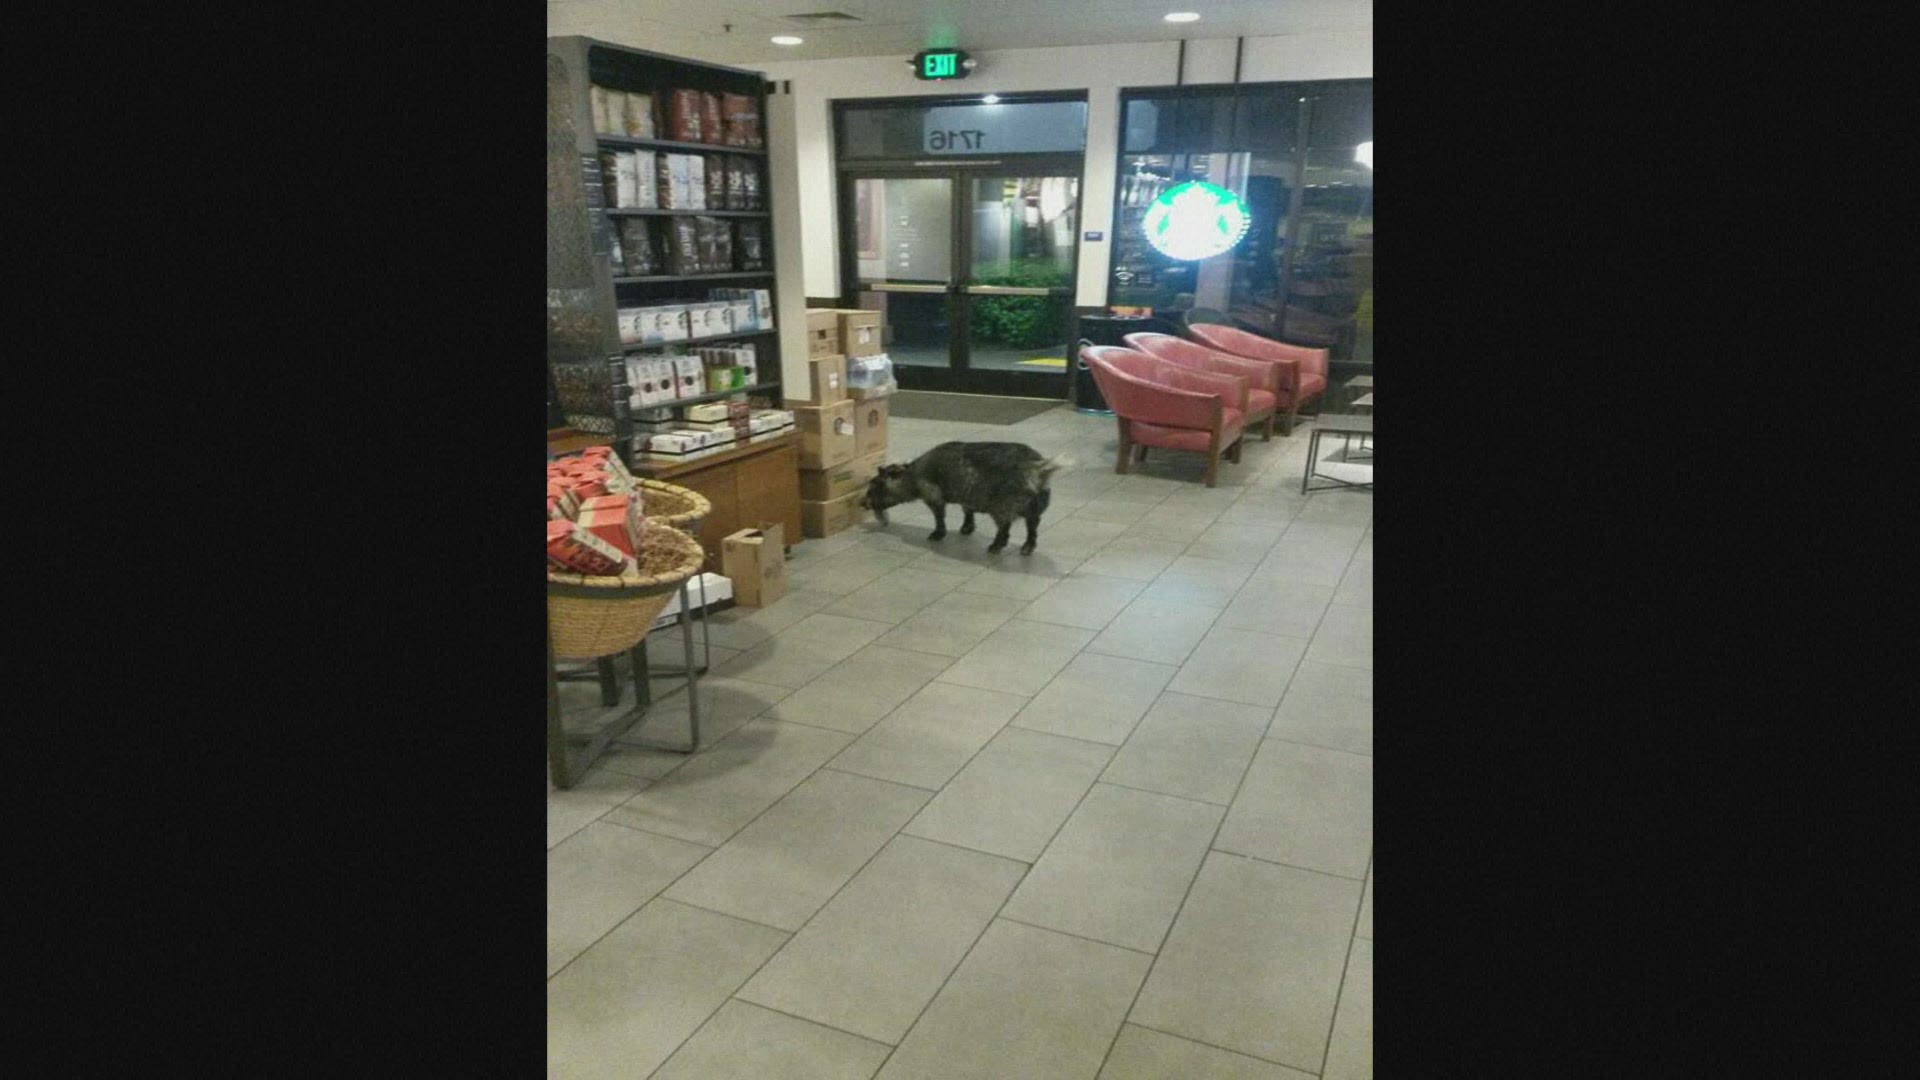 Employees who were opening the Starbucks tried to give the goat a banana, but the animal kept walking into the coffee shop and started chewing on a box.